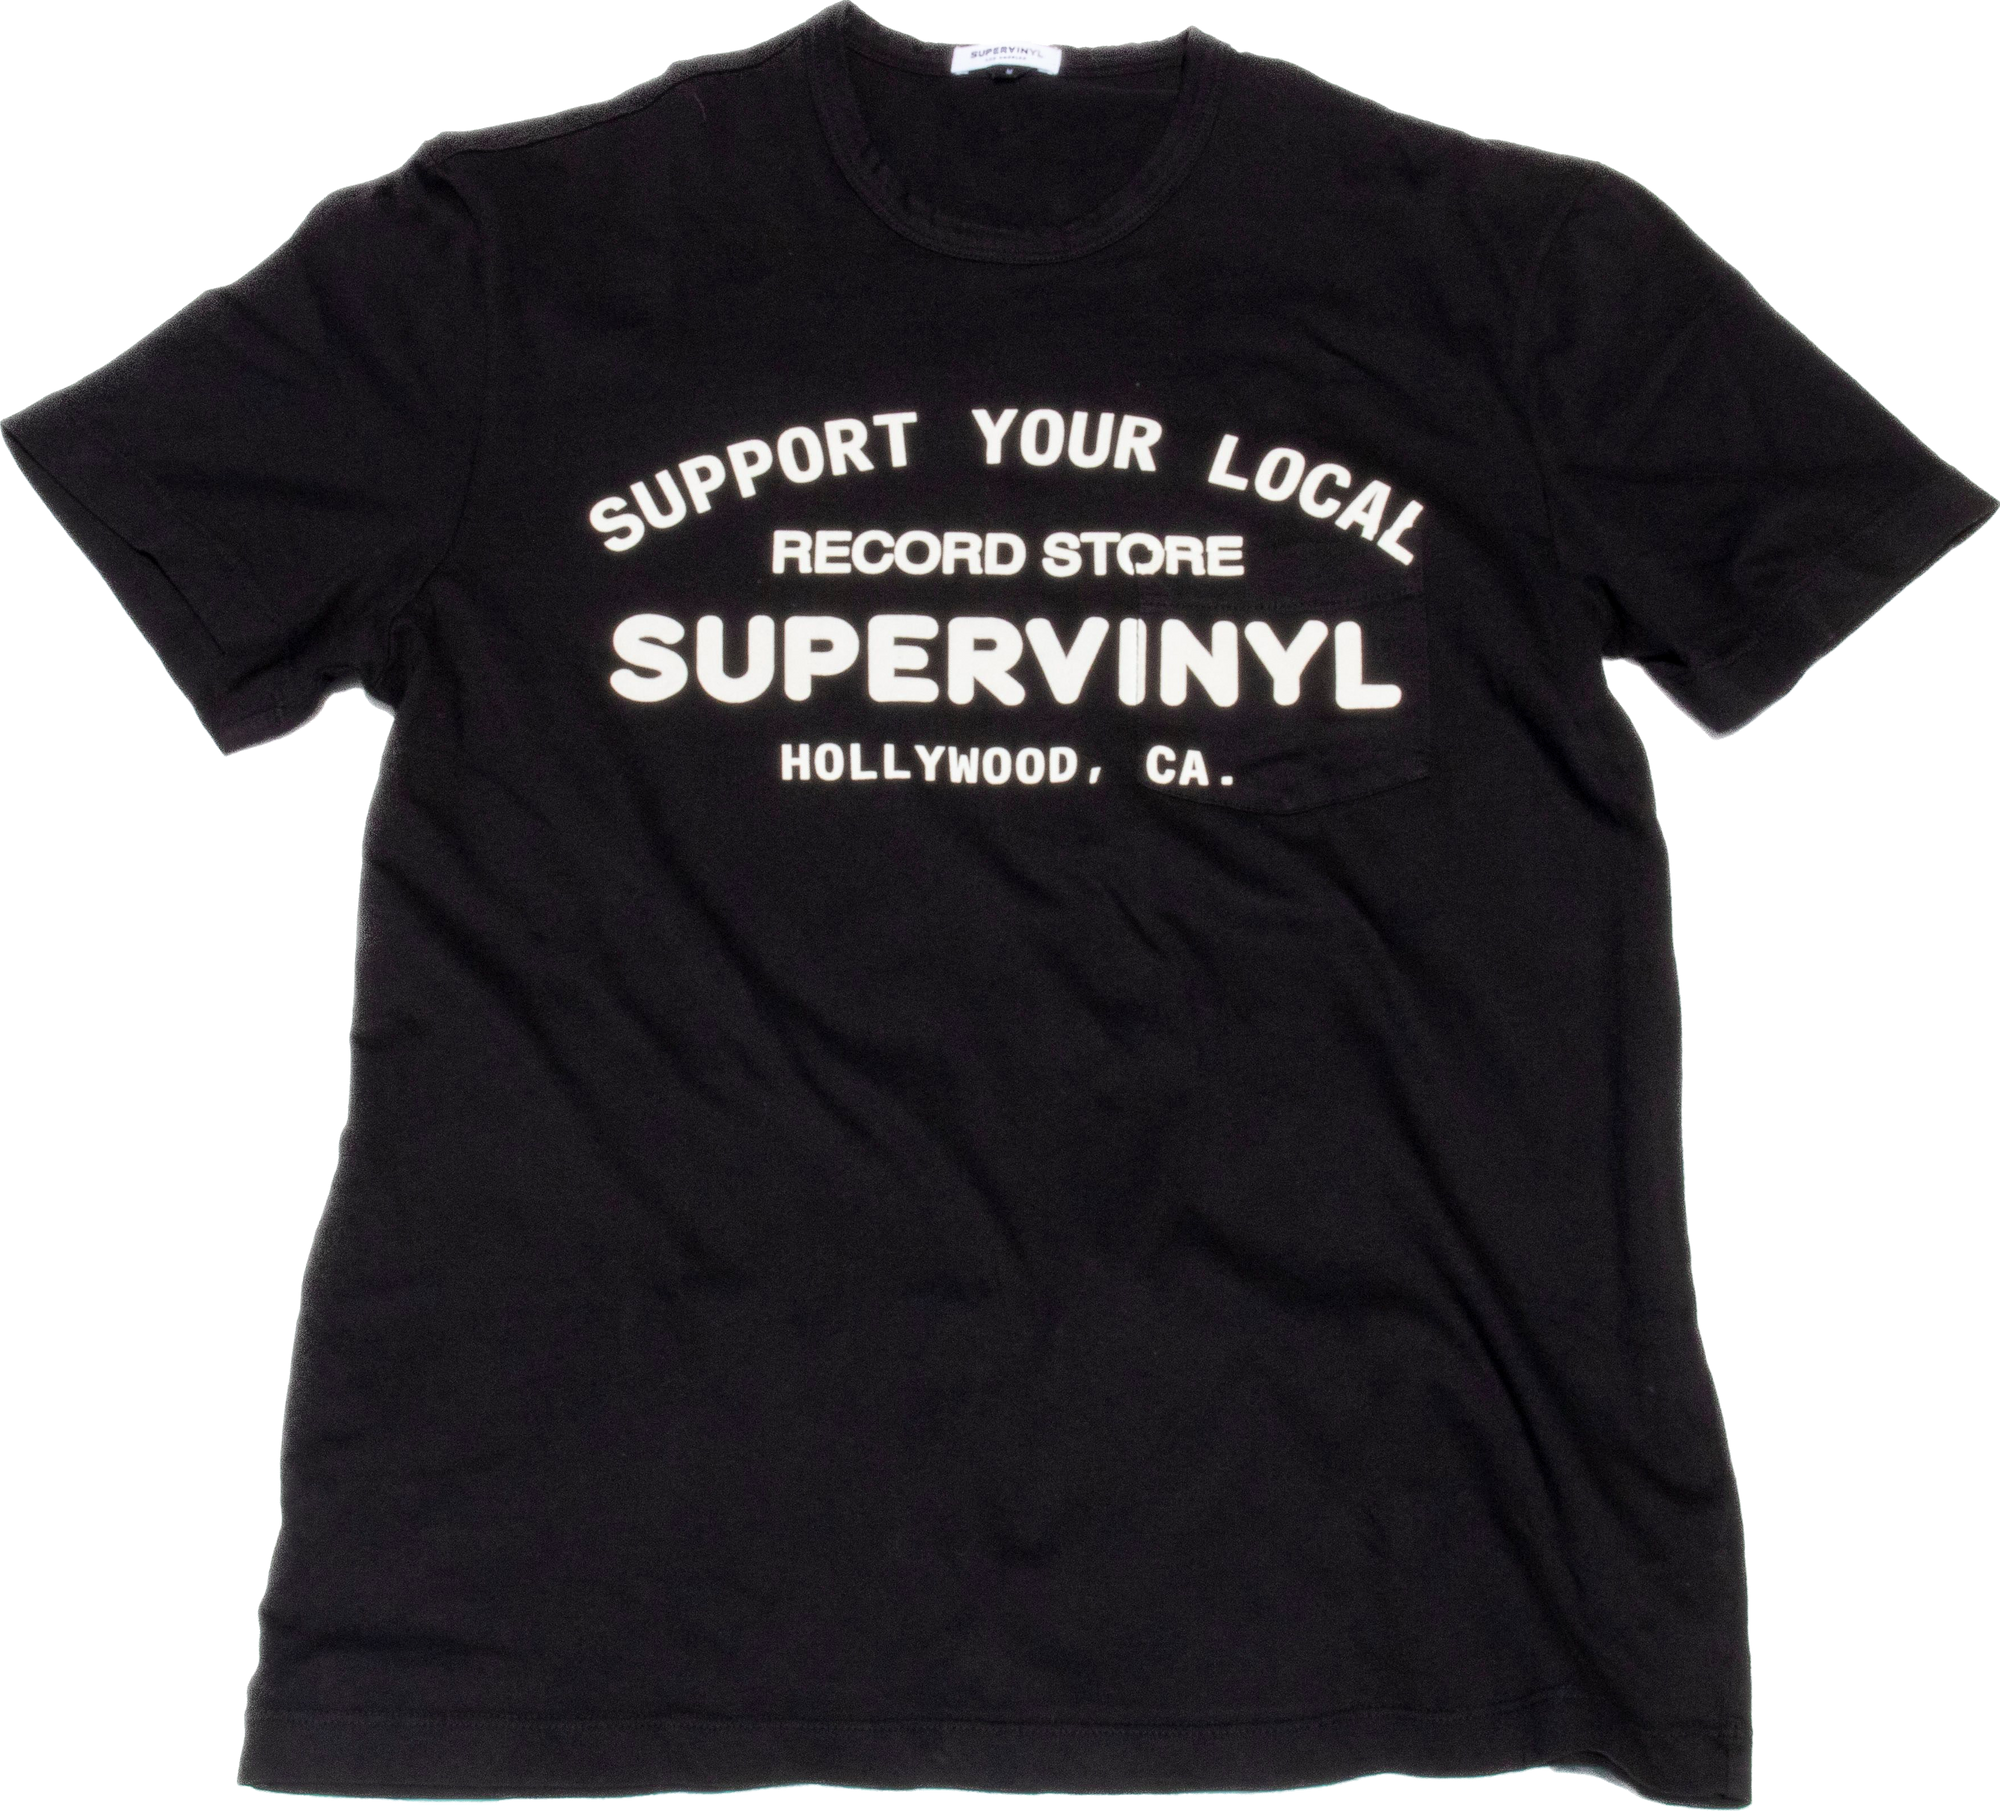 New Support Your Local Record Store Jet Black